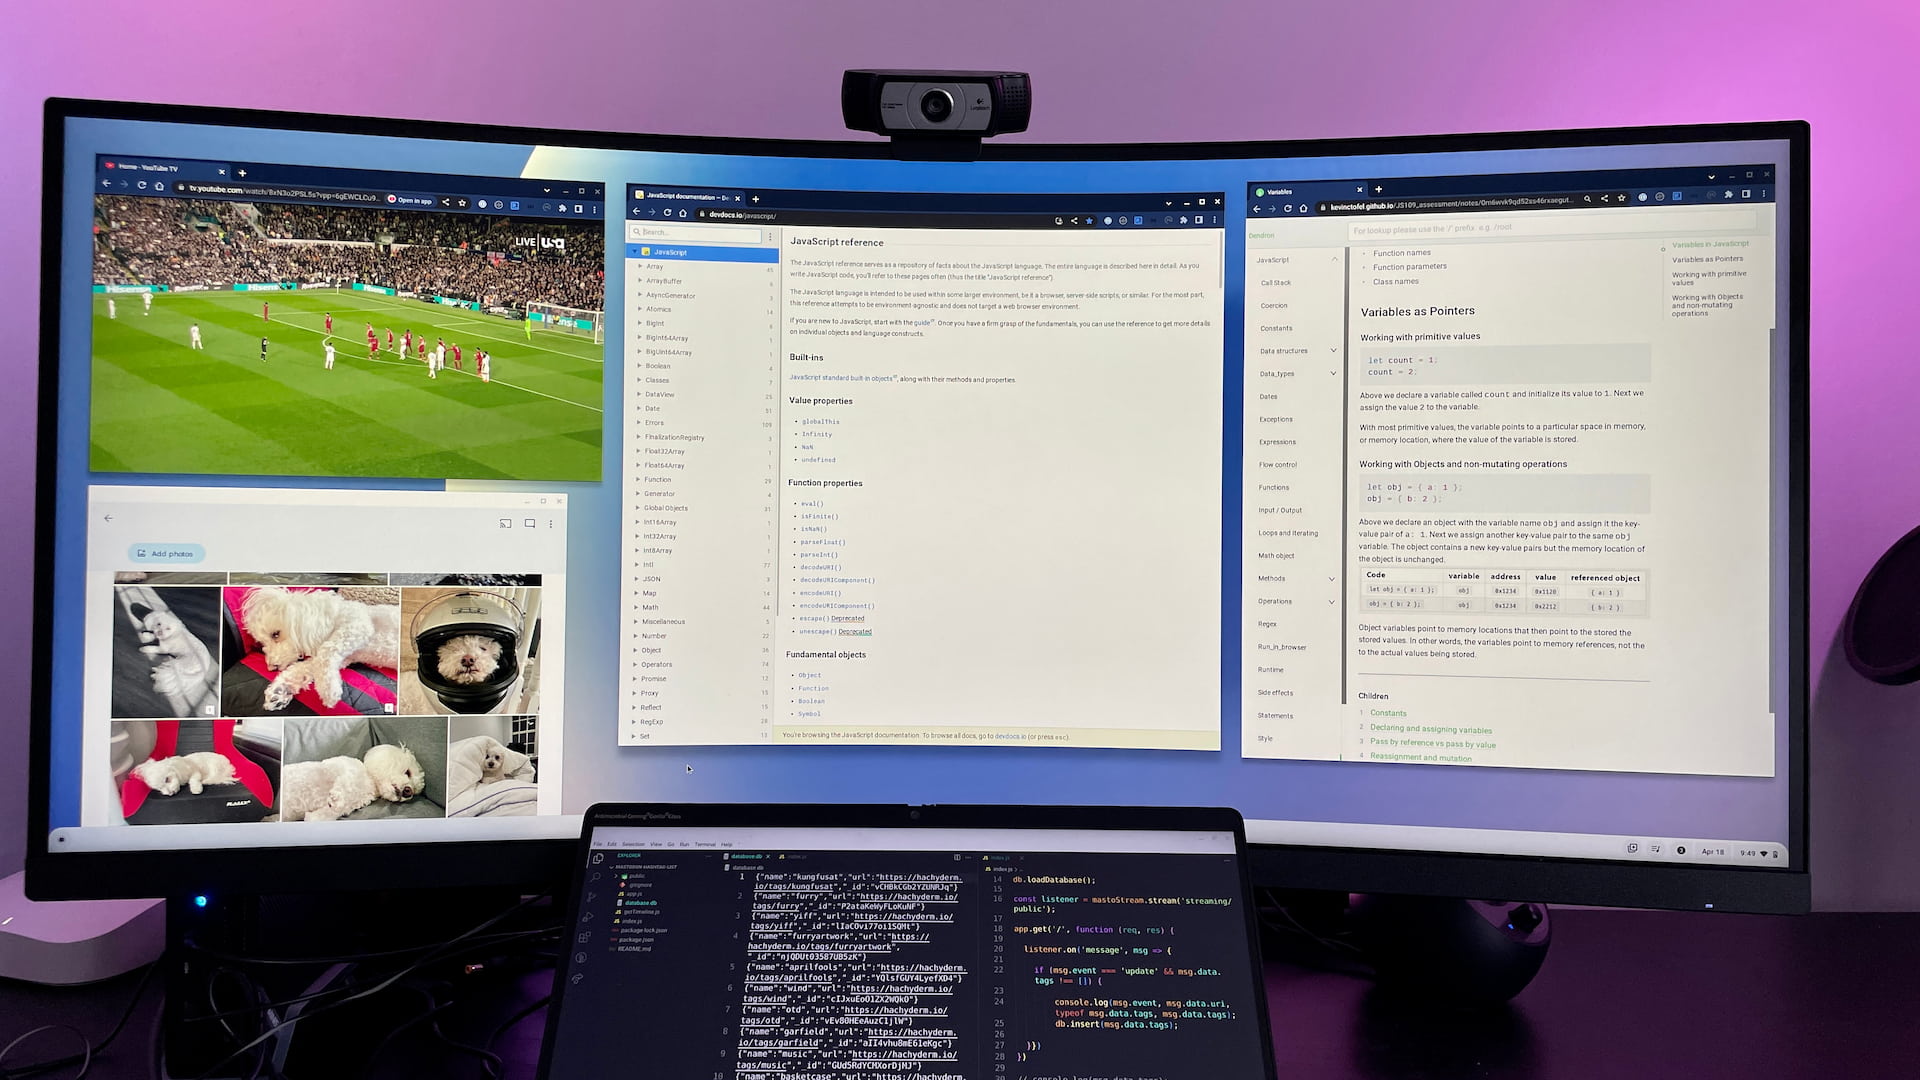 Using a Chromebook and ultrawide monitor